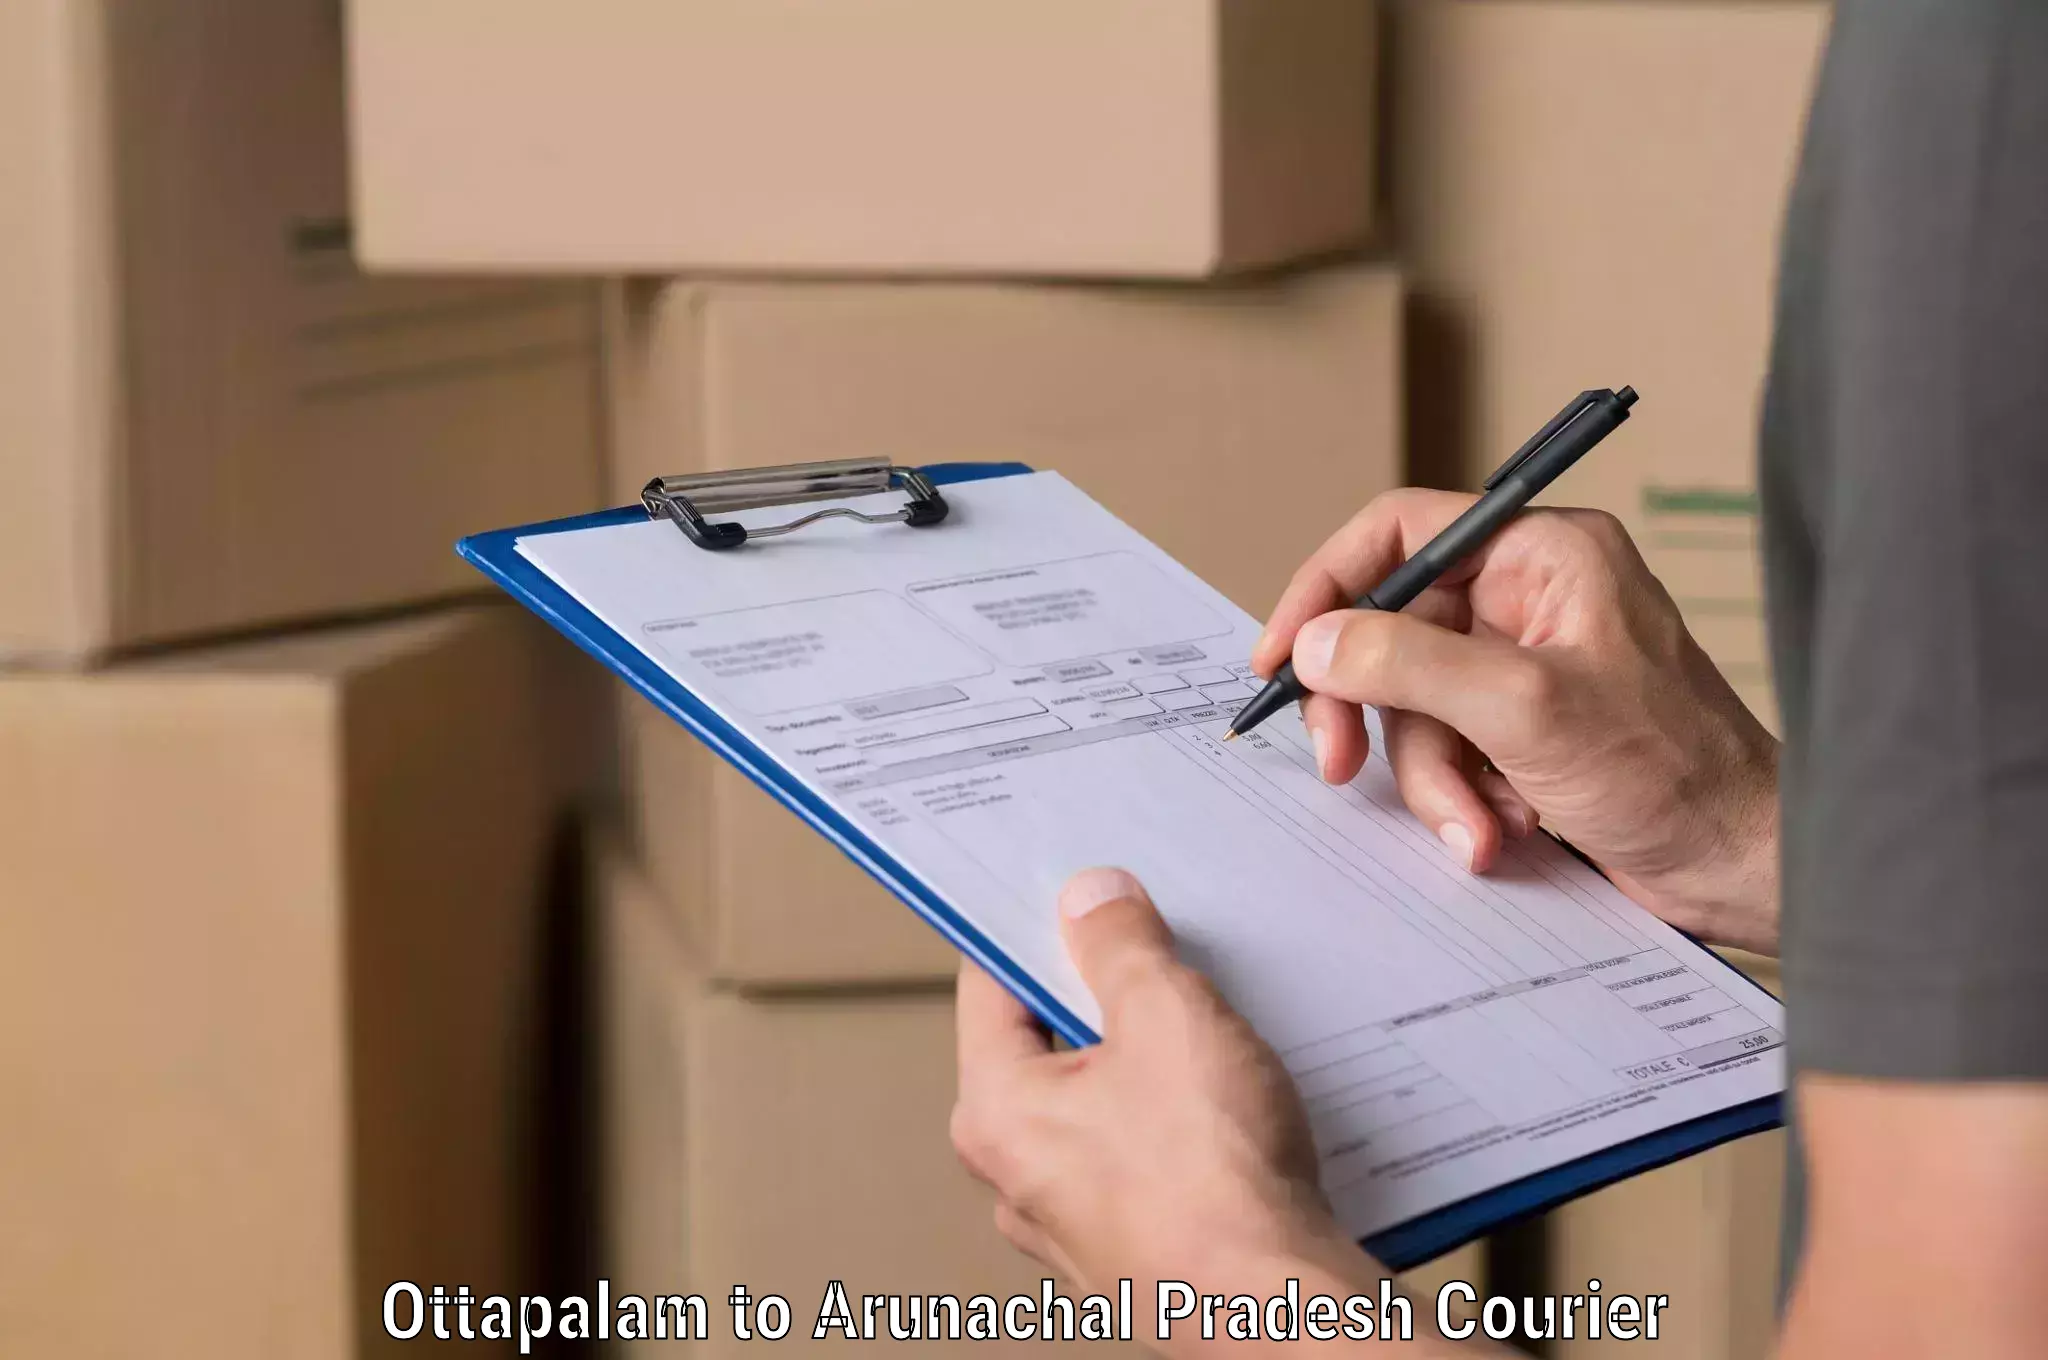 Courier service partnerships Ottapalam to Dirang